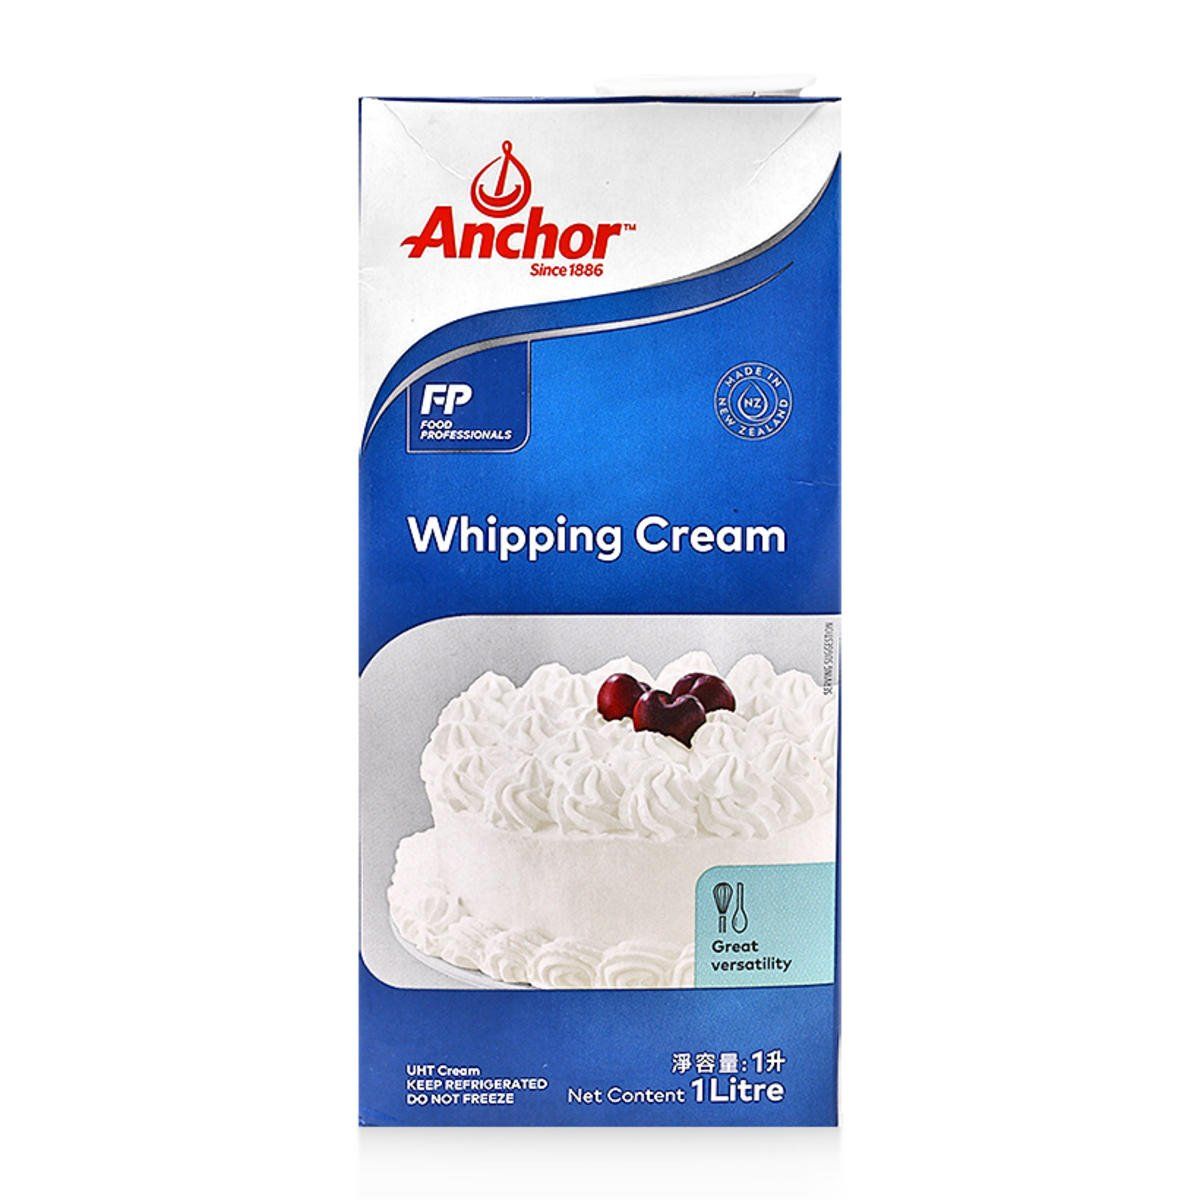 Whipping Cream Anchor hộp 1L